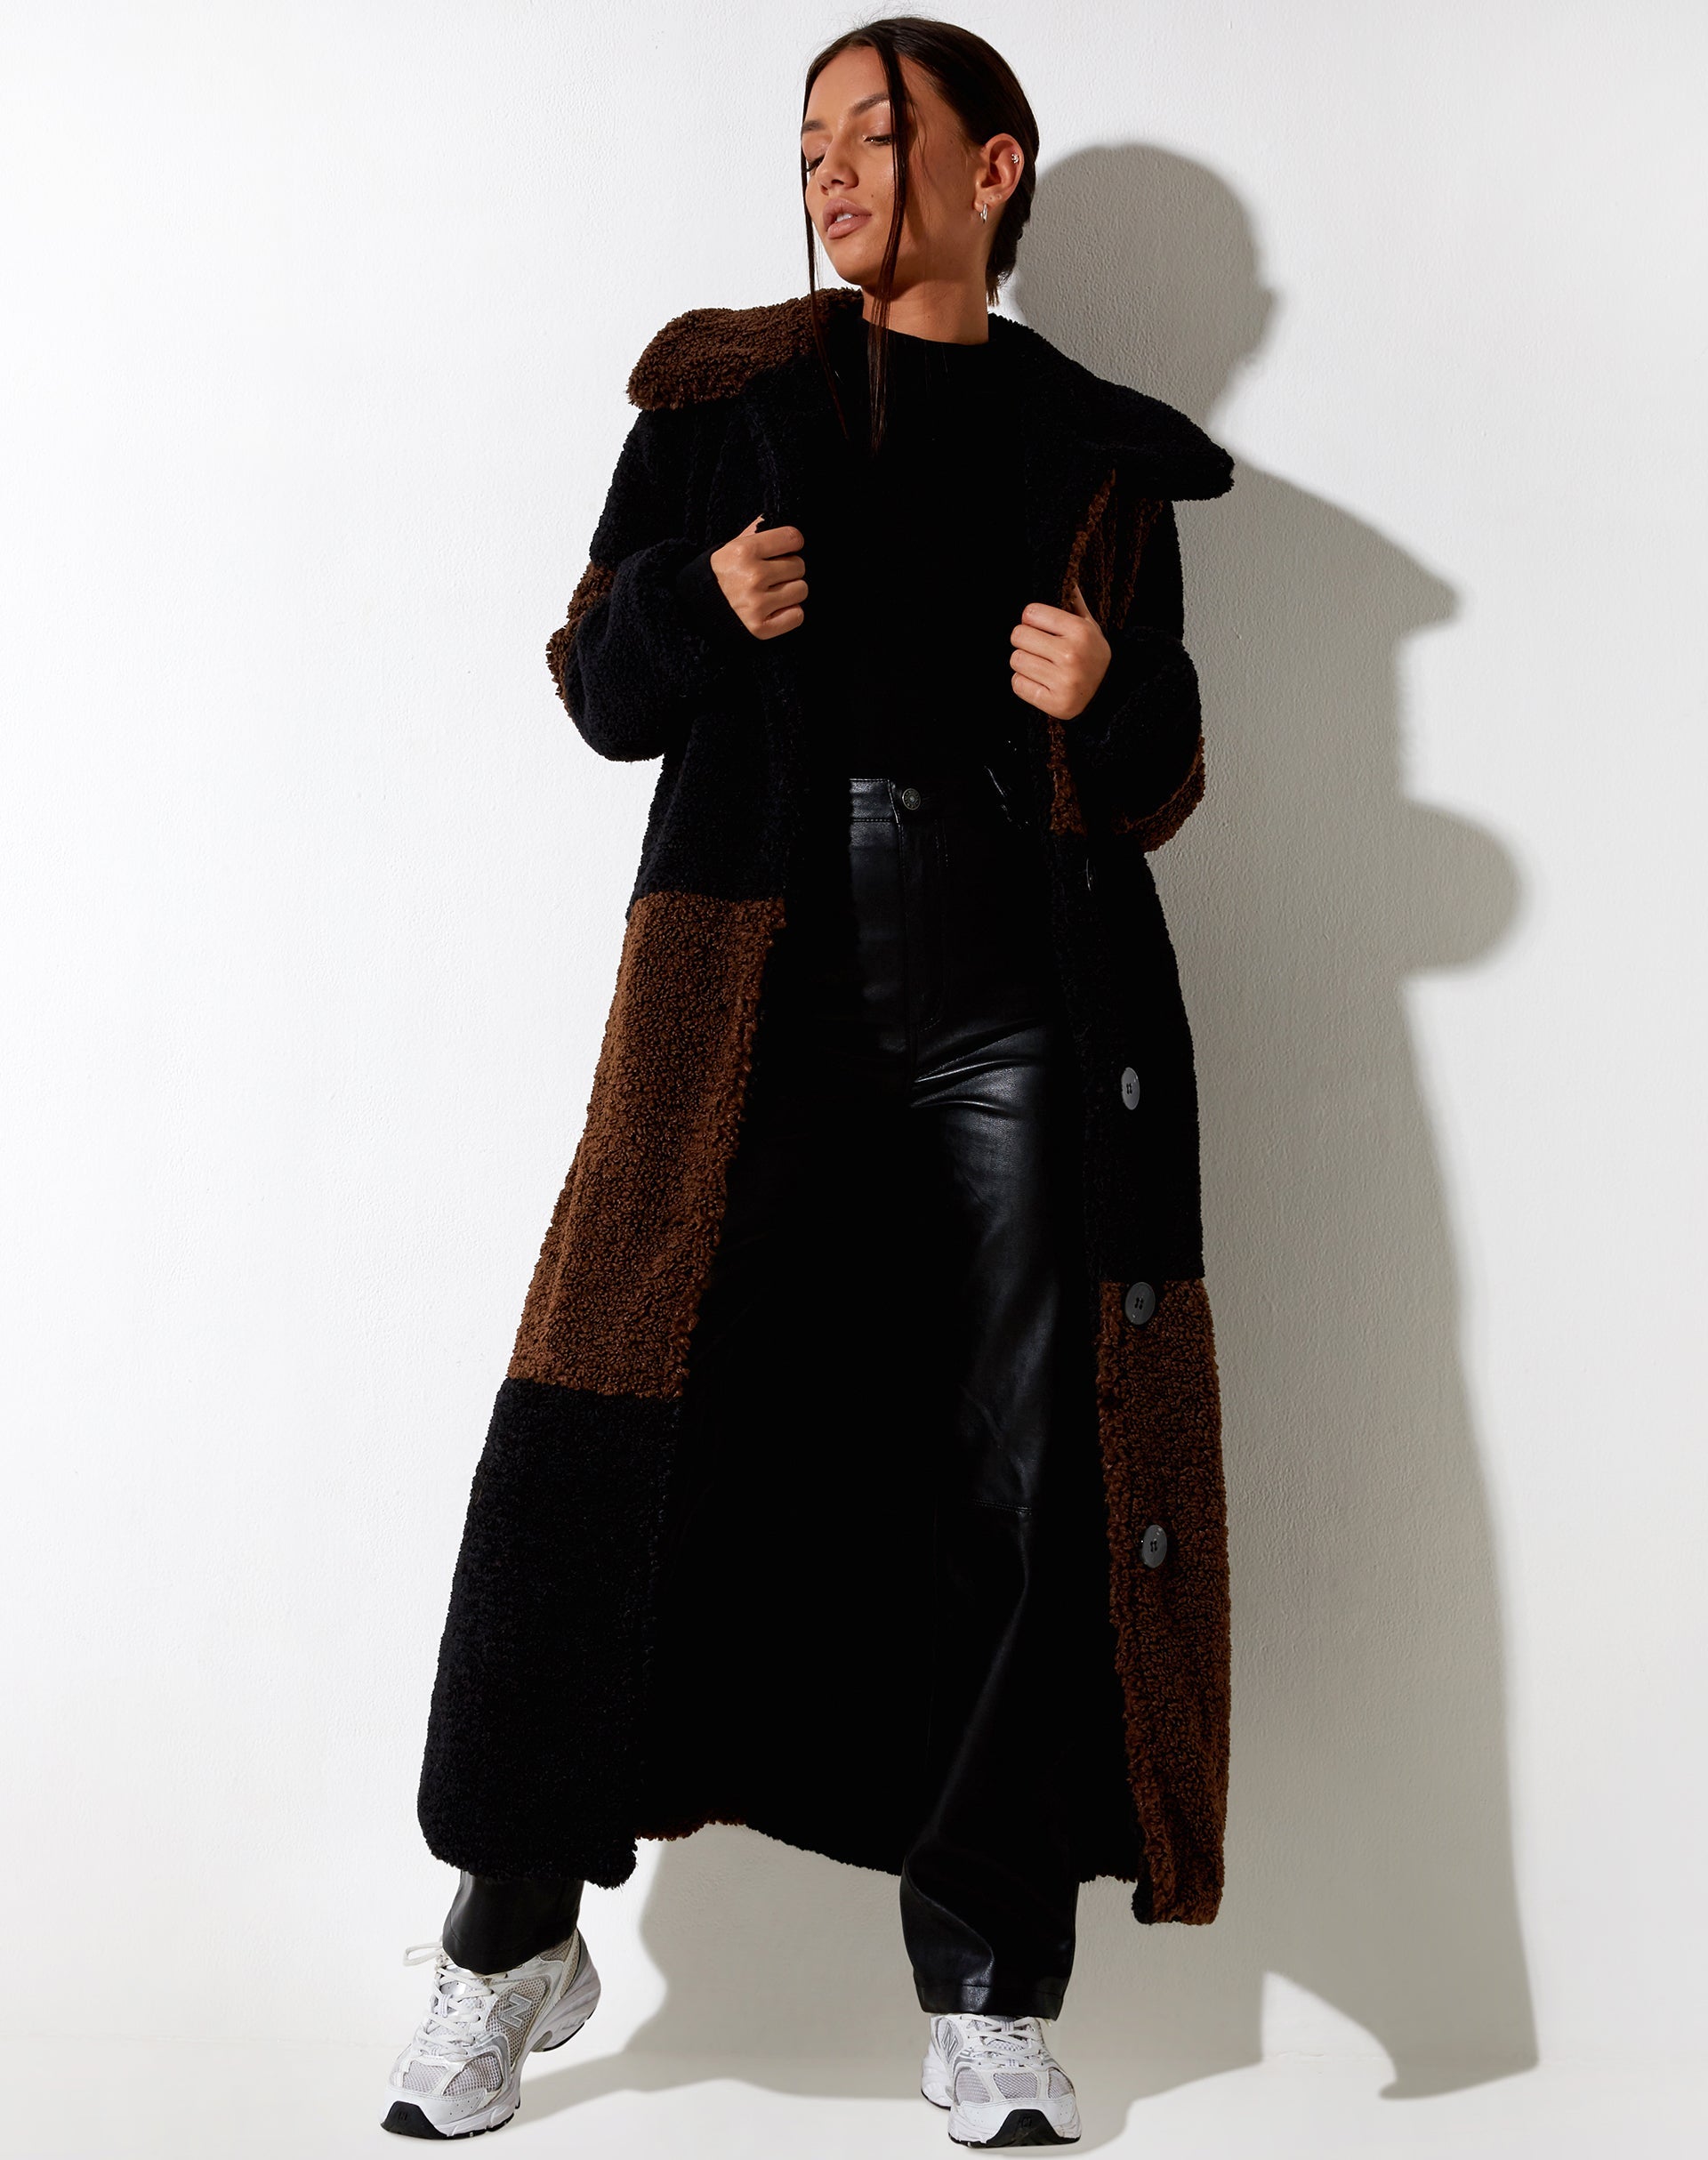 Image of Humus Teddy Coat in Panelled Chocolate and Black